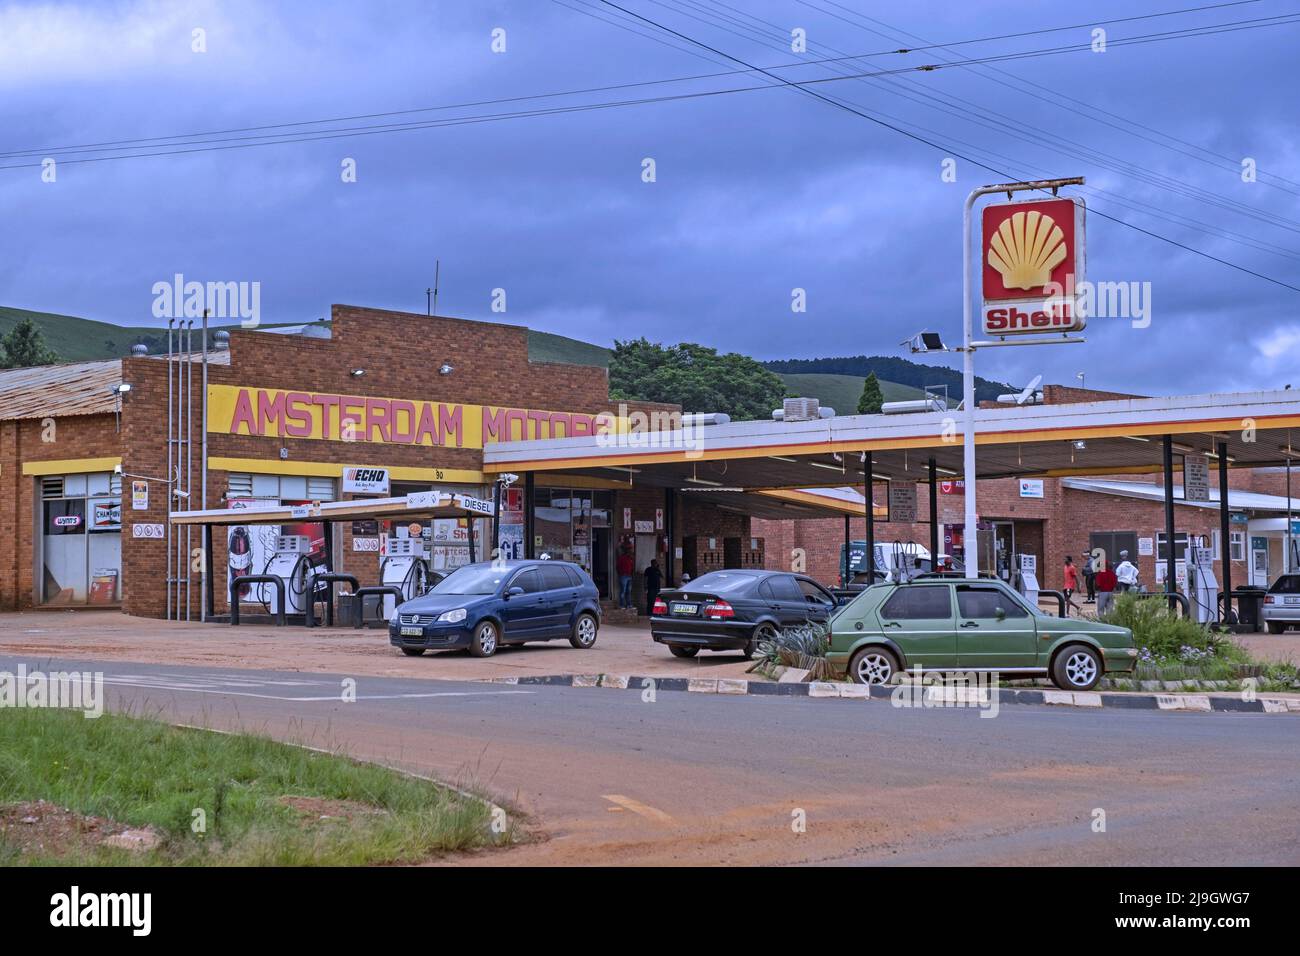 Shell gas station / petrol station in the little town Amsterdam / eMvelo, Mkhondo, Gert Sibande, Mpumalanga province, South Africa Stock Photo